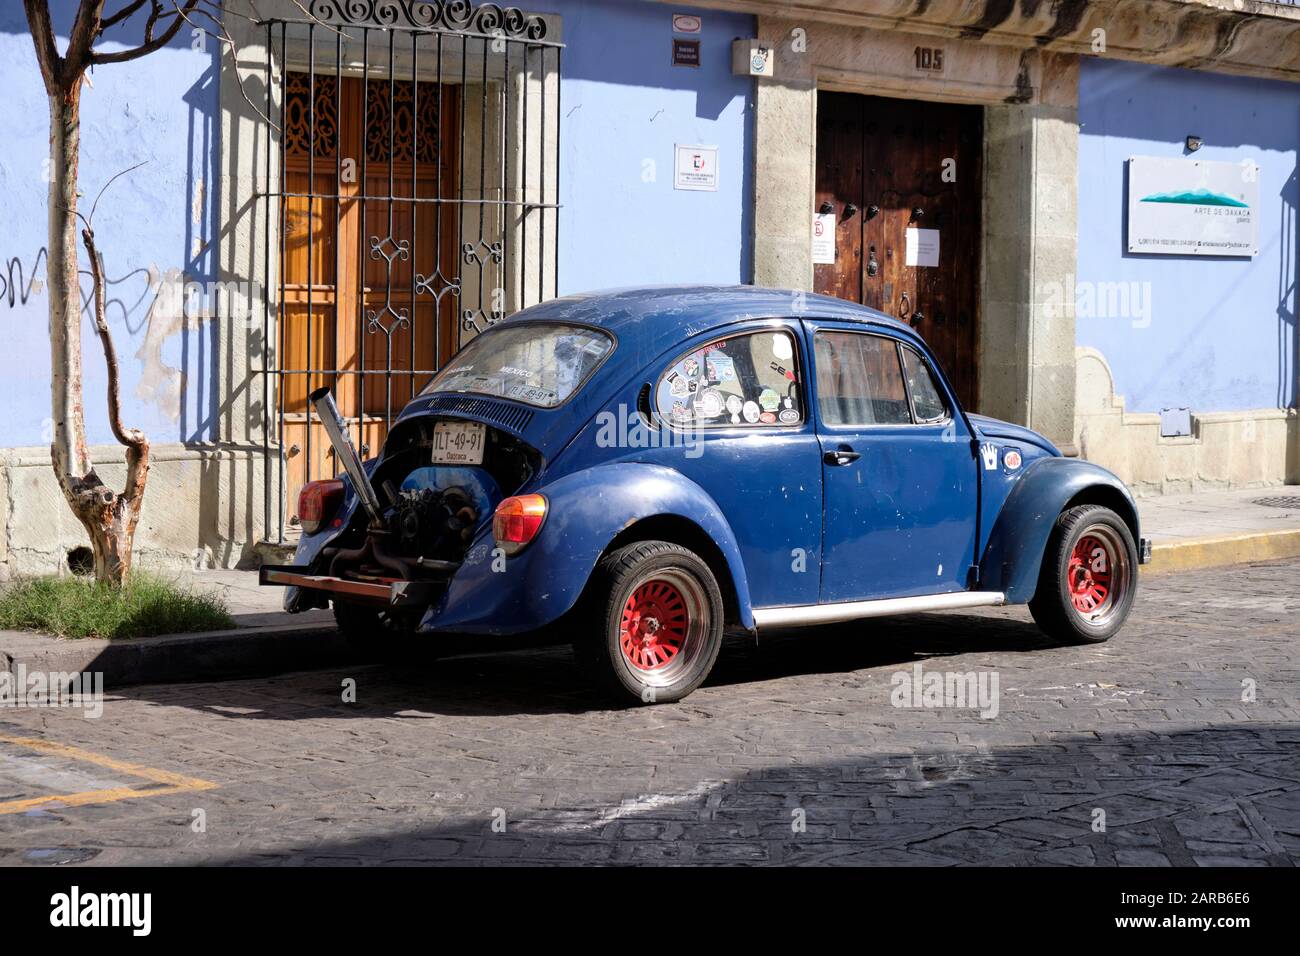 Blue classic Volkswagen beetle car parked on street next to a colonial house, painted also blue.  The engine has been modified with the hood removed Stock Photo